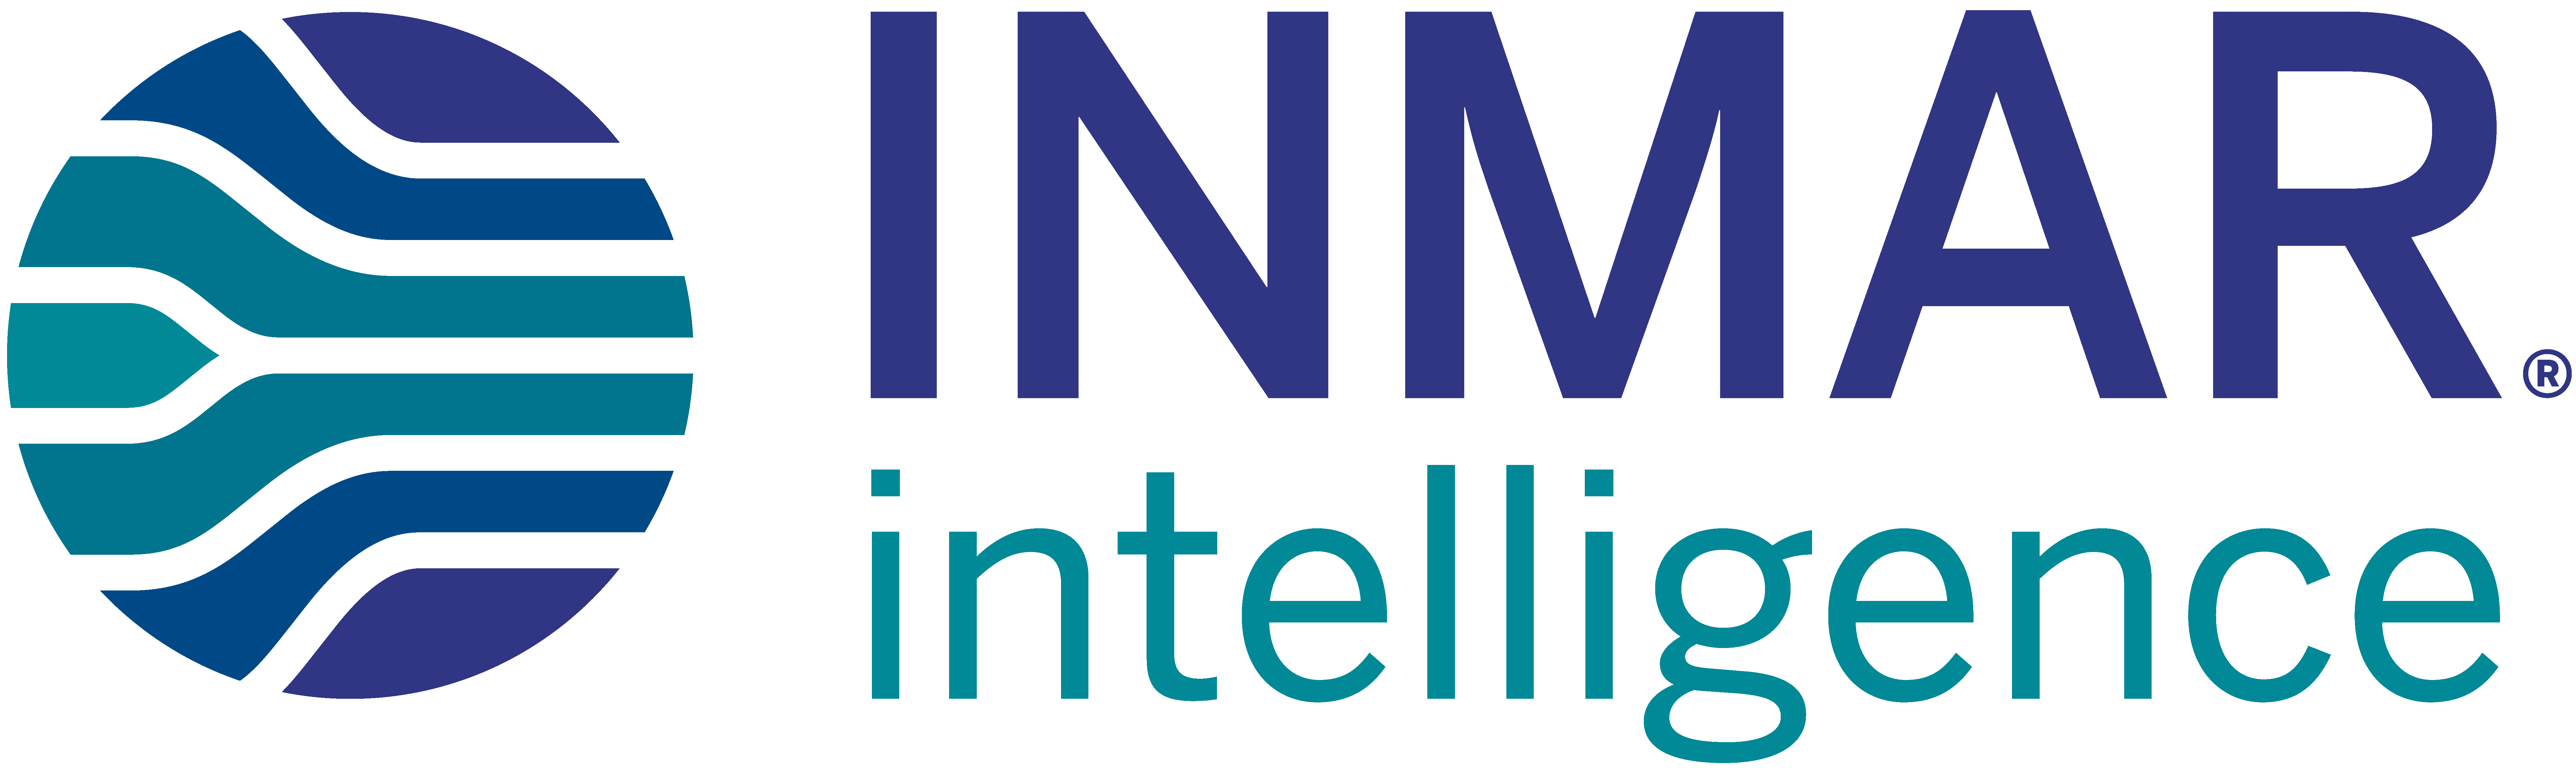 Inmar Intelligence Names Spencer Baird Chief Executive Officer